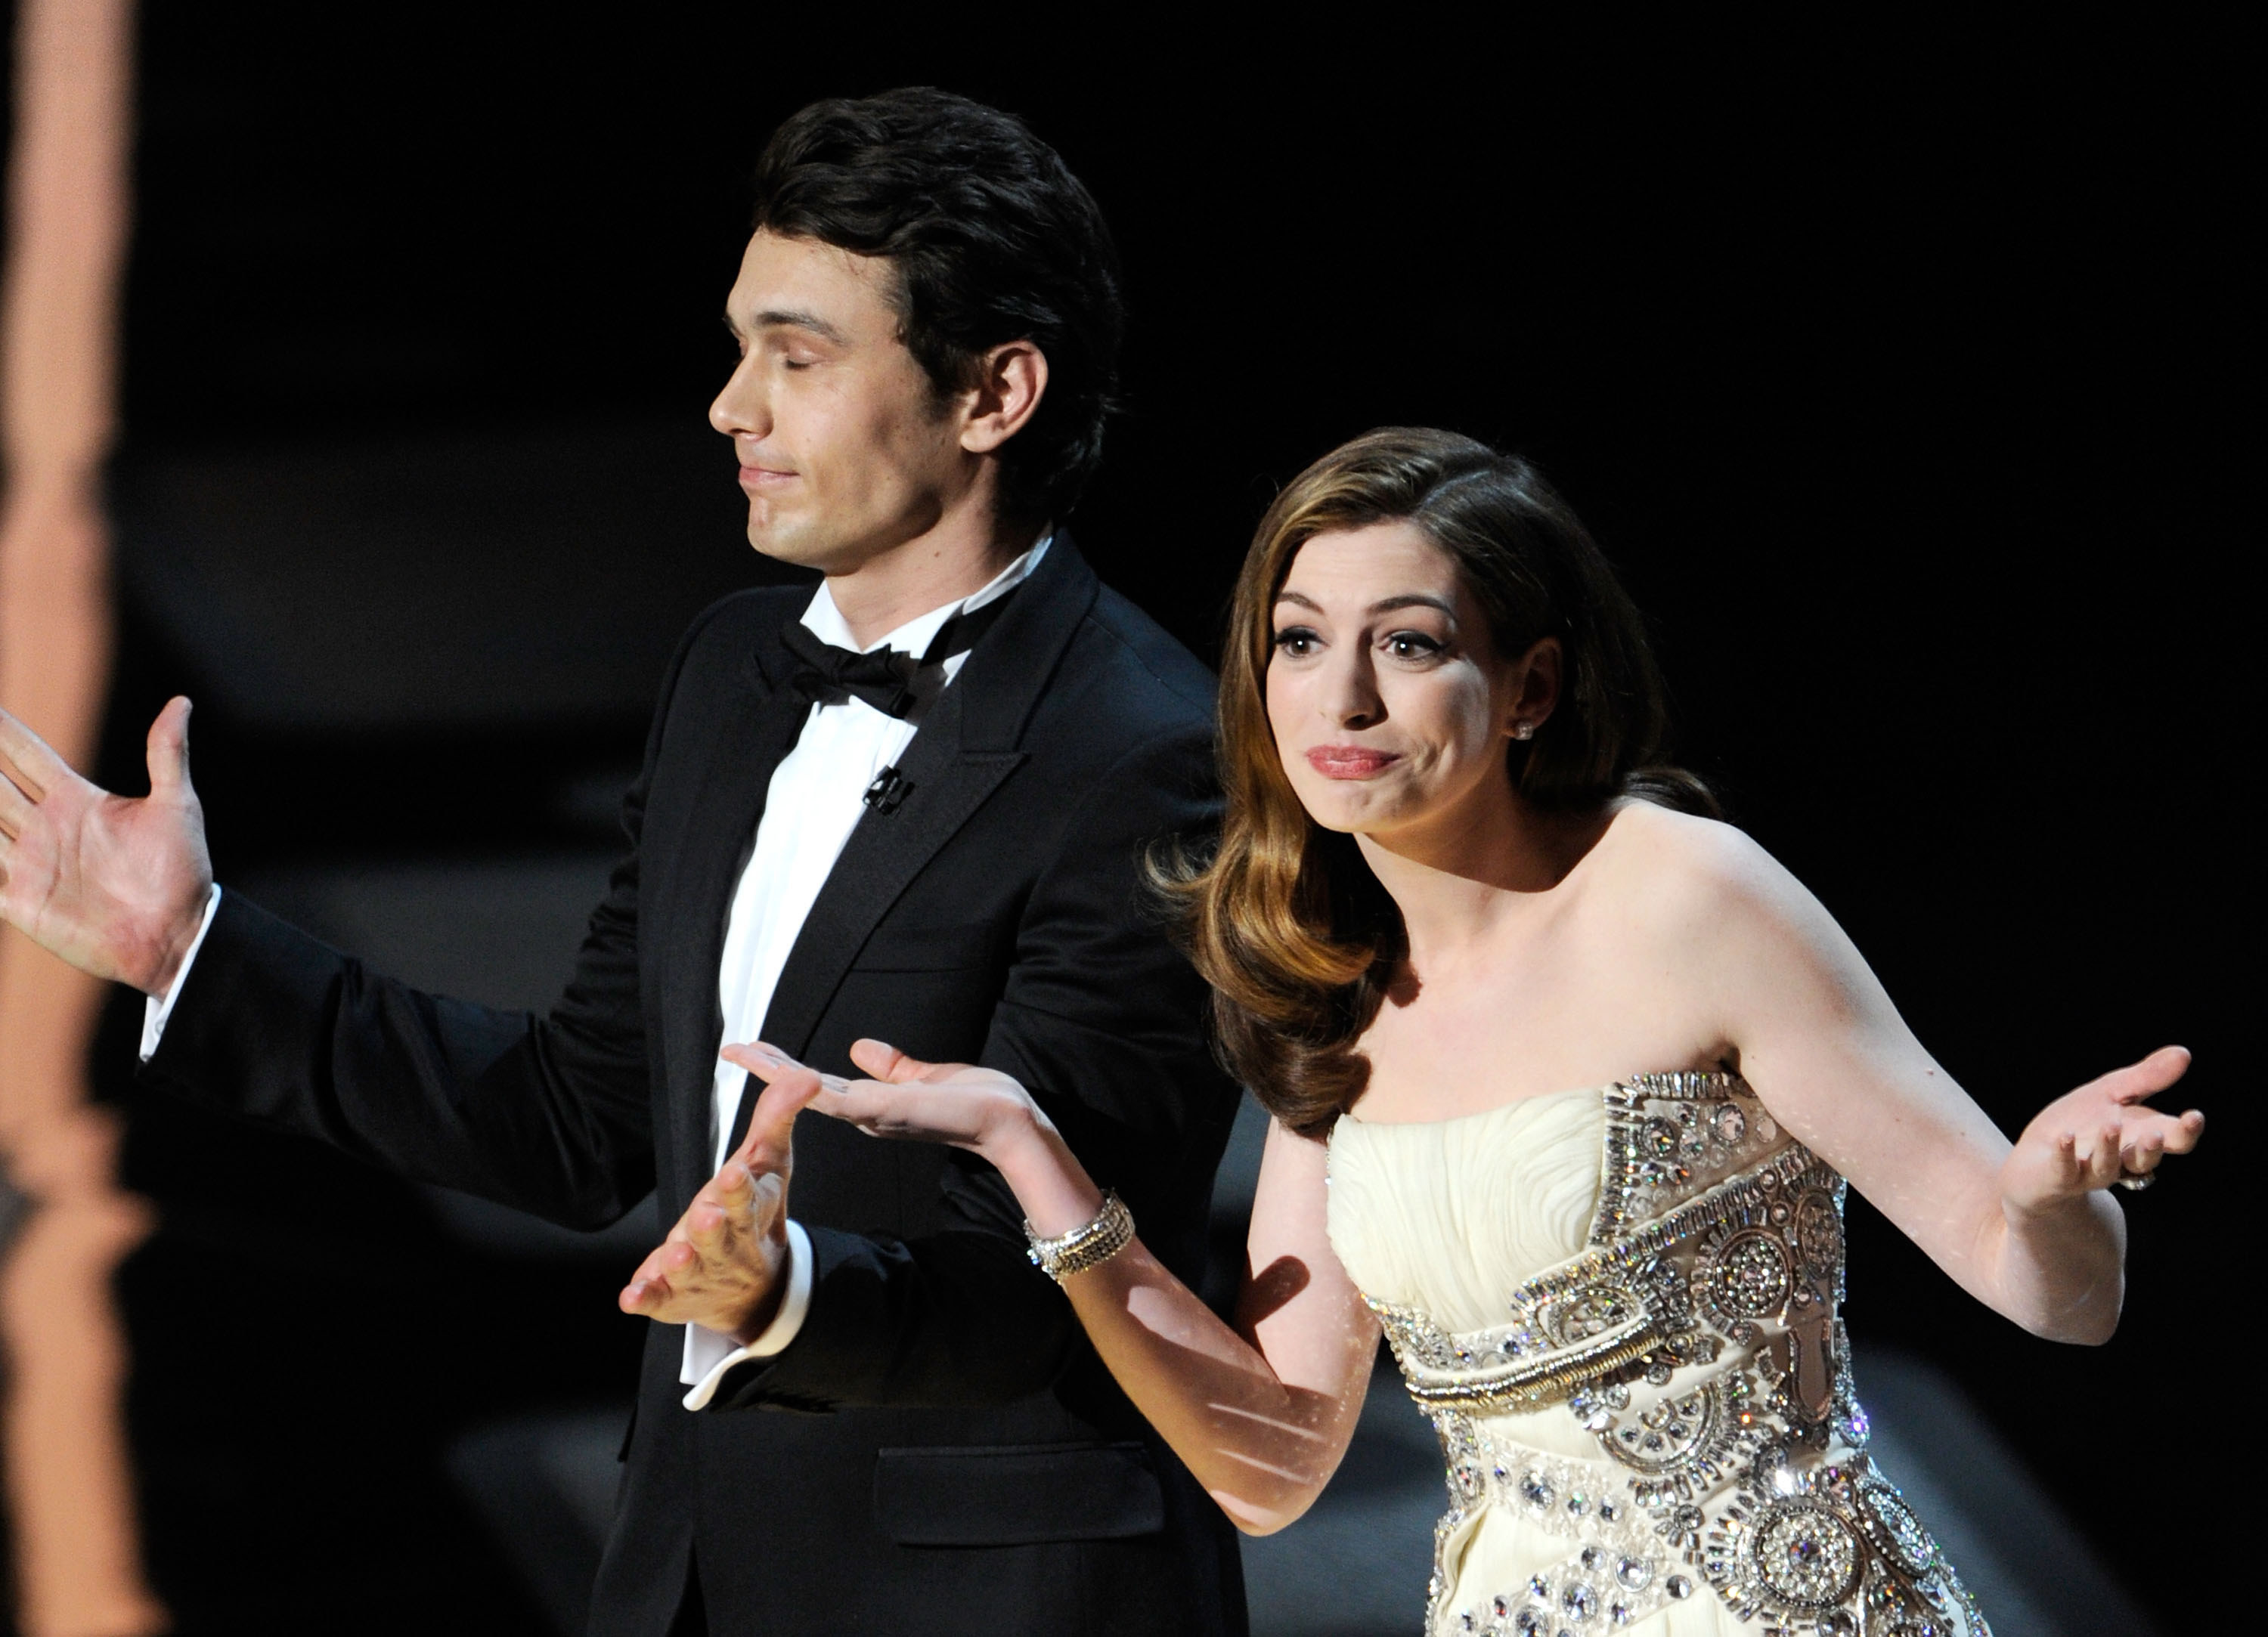 Did Anne Hathaway Audition for 'Les Mis' at Oscars?